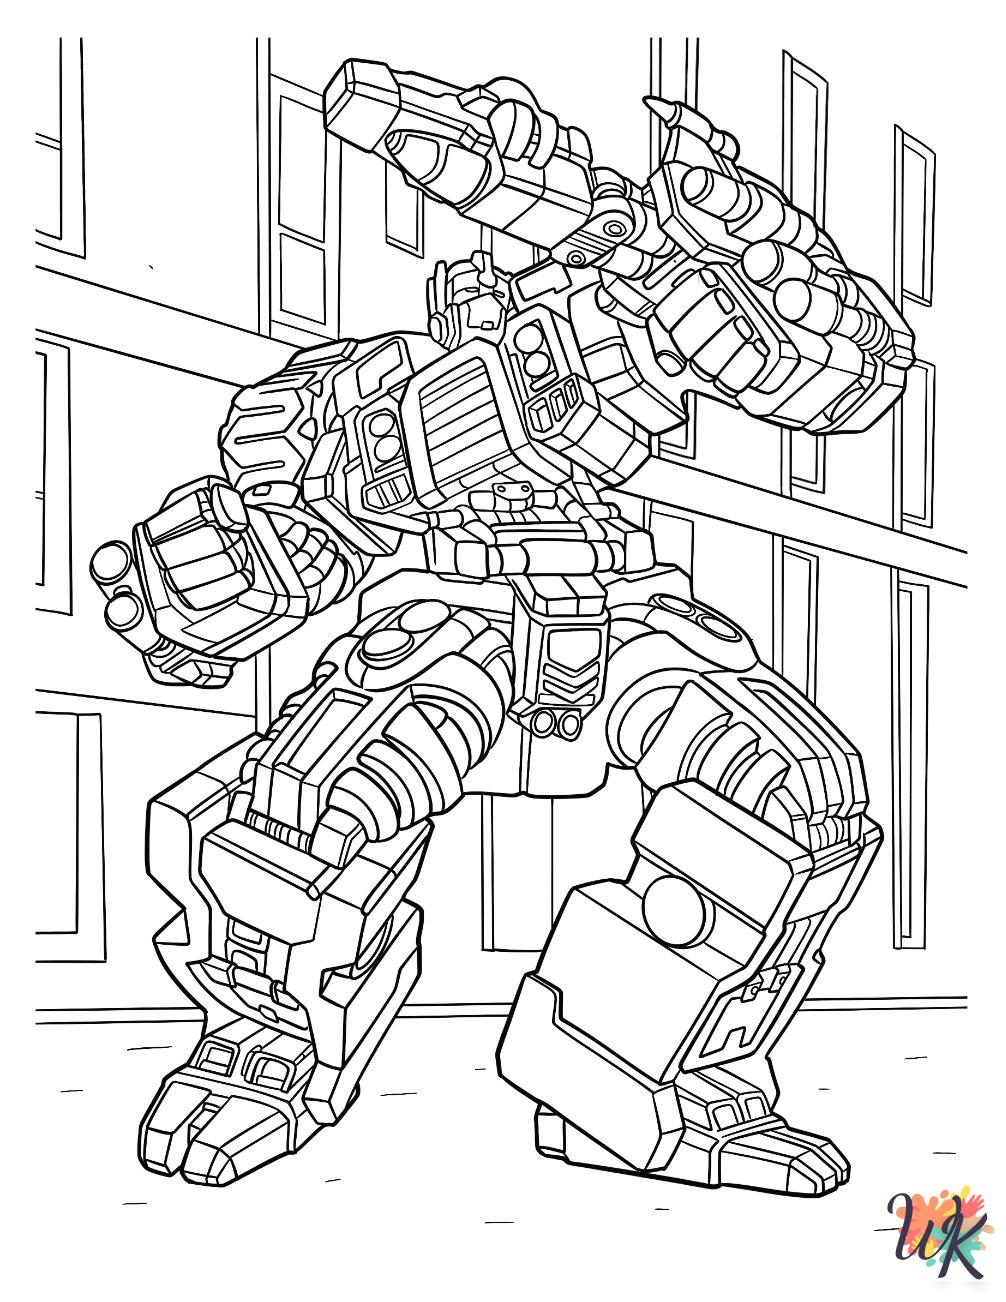 Optimus Prime themed coloring pages 1